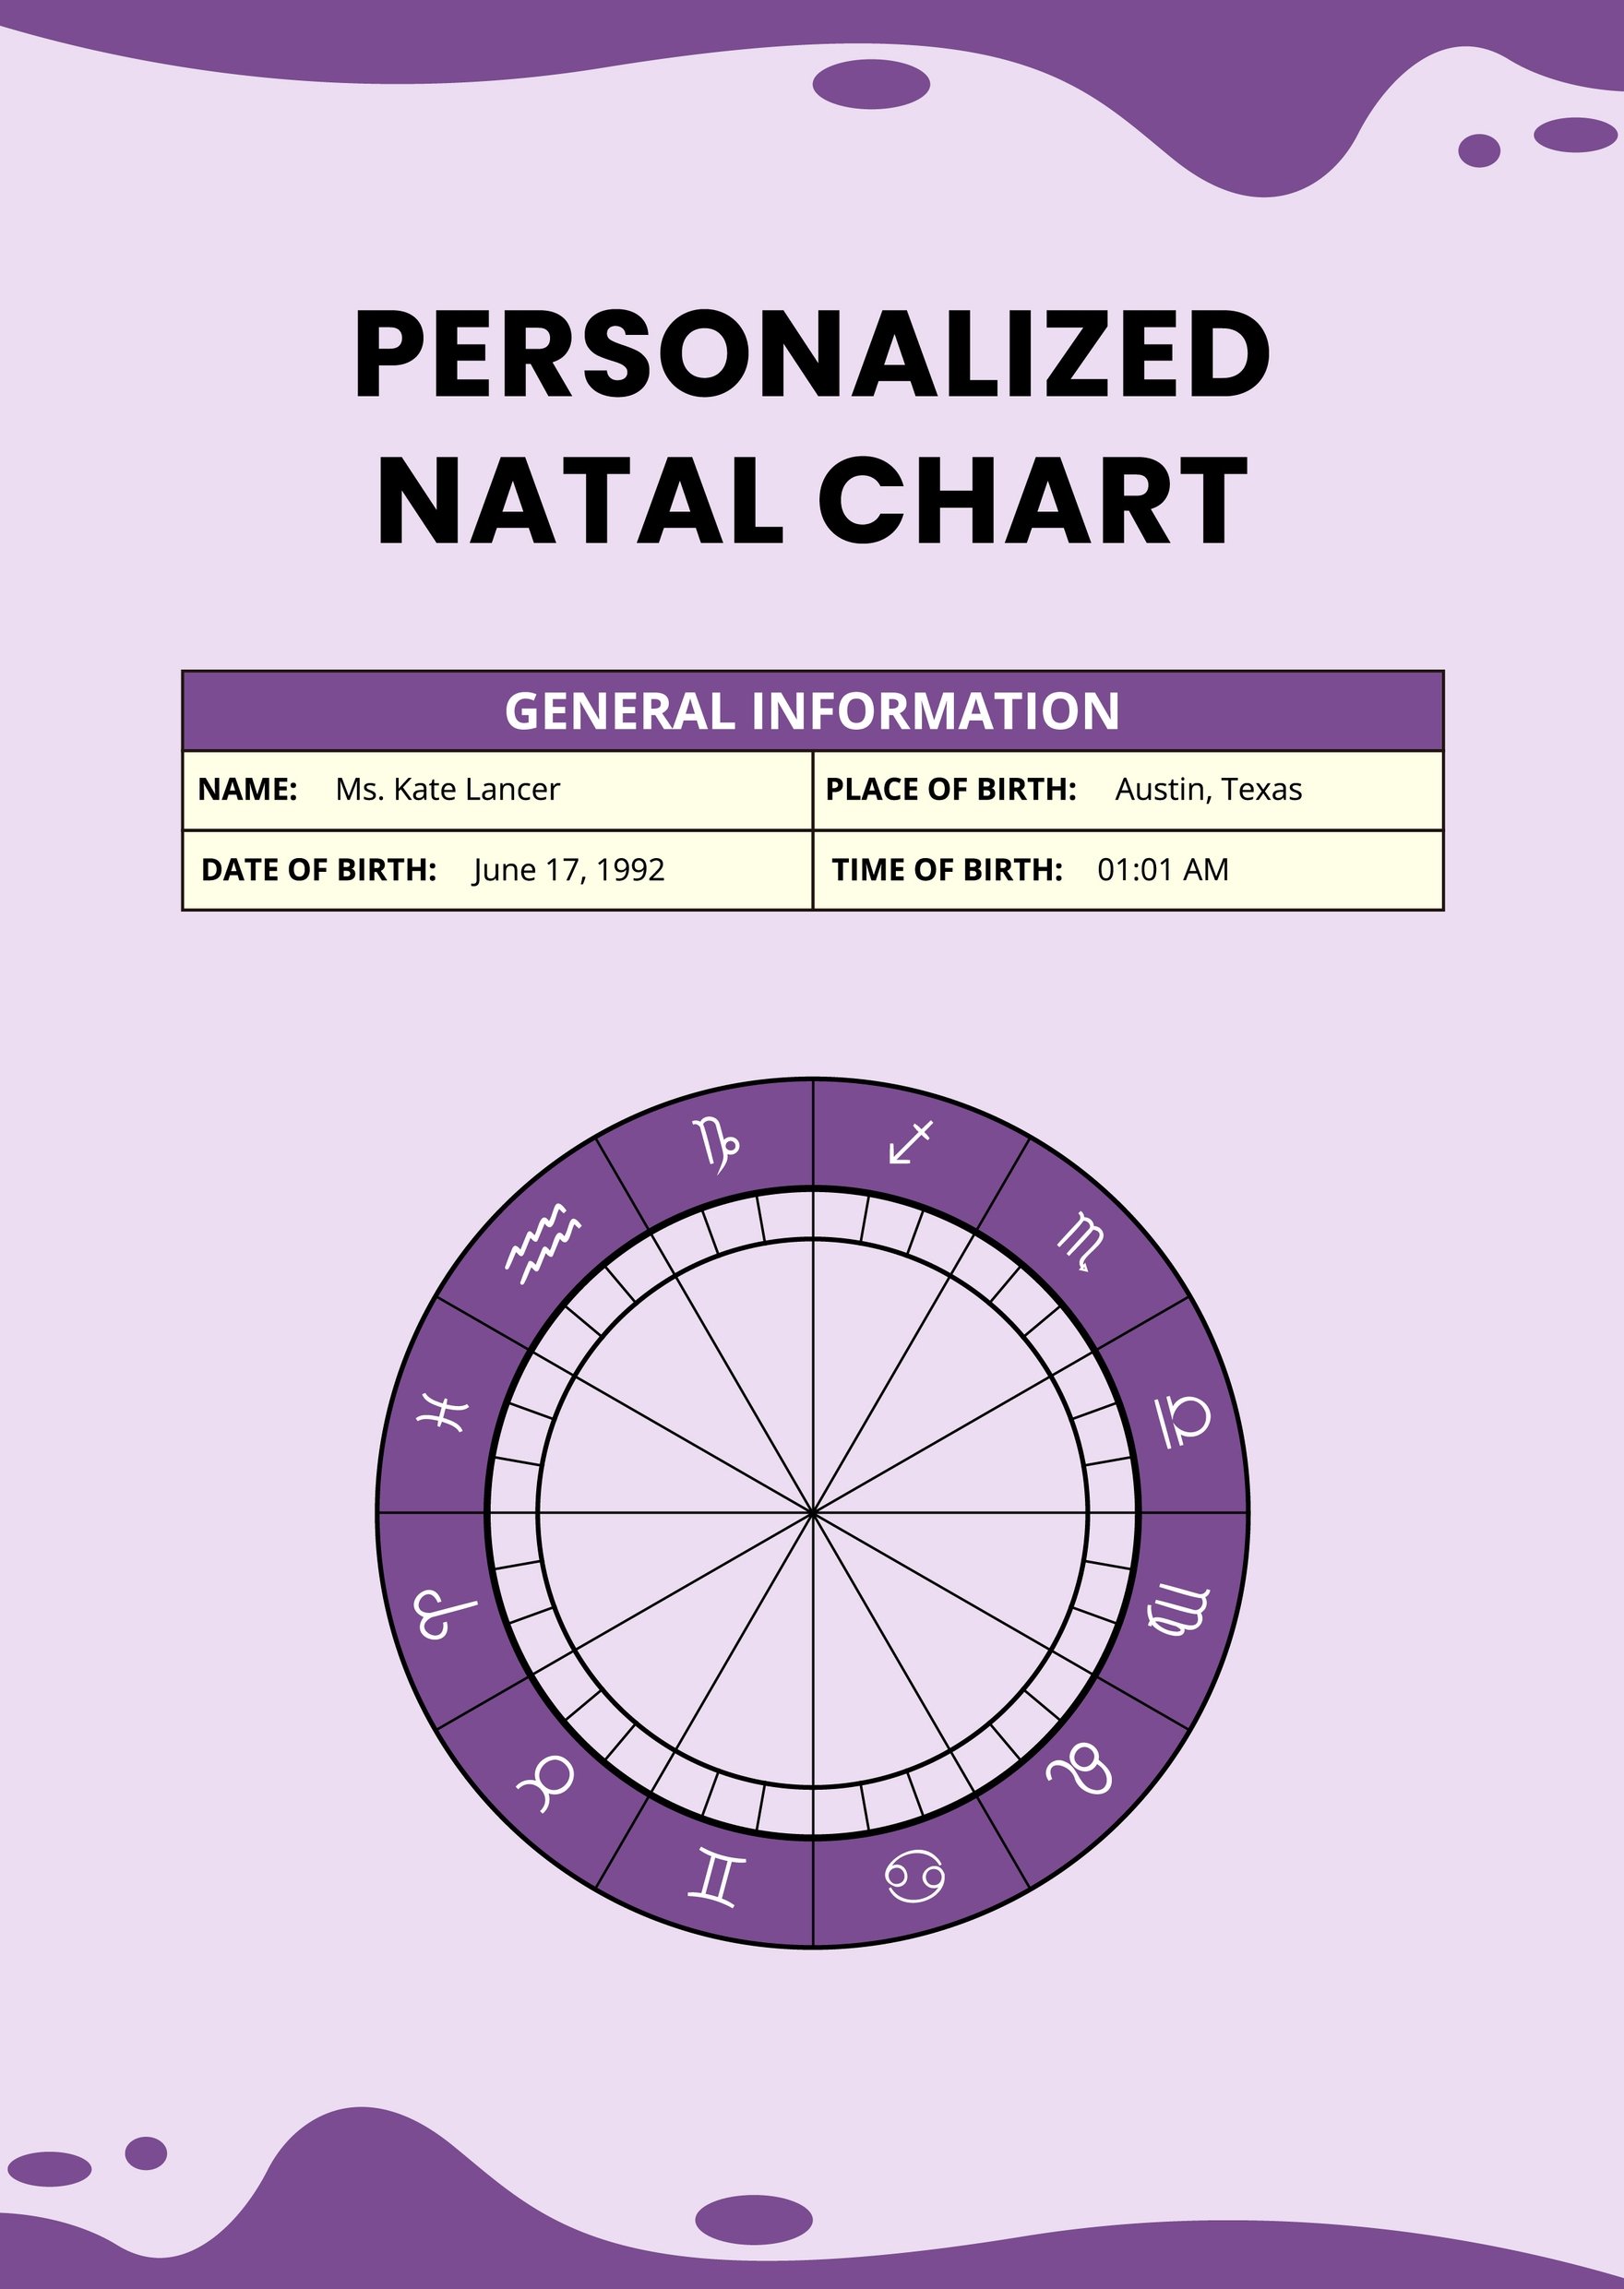 Personalized Natal Chart Template